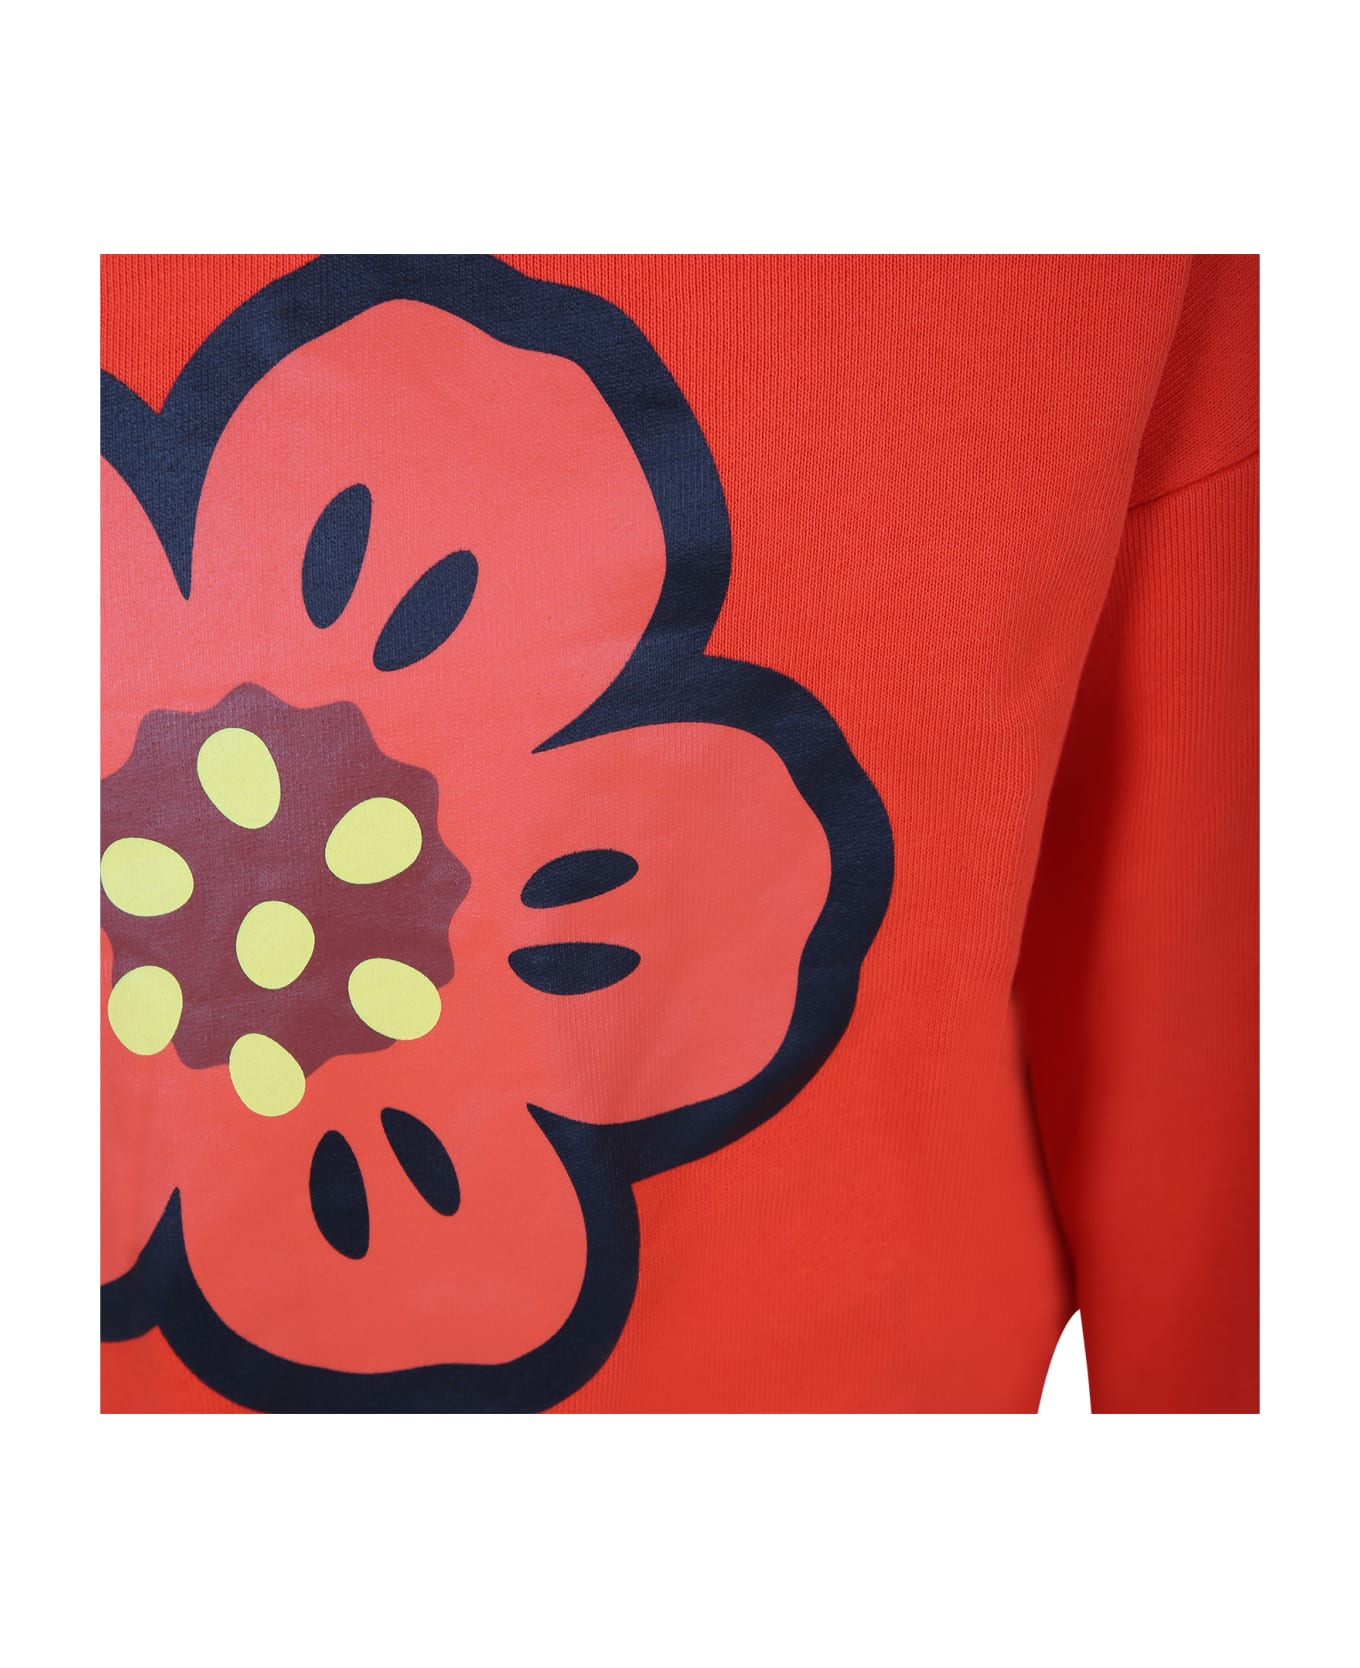 Kenzo Kids Red Sweatshirt For Girl With Flower - Red